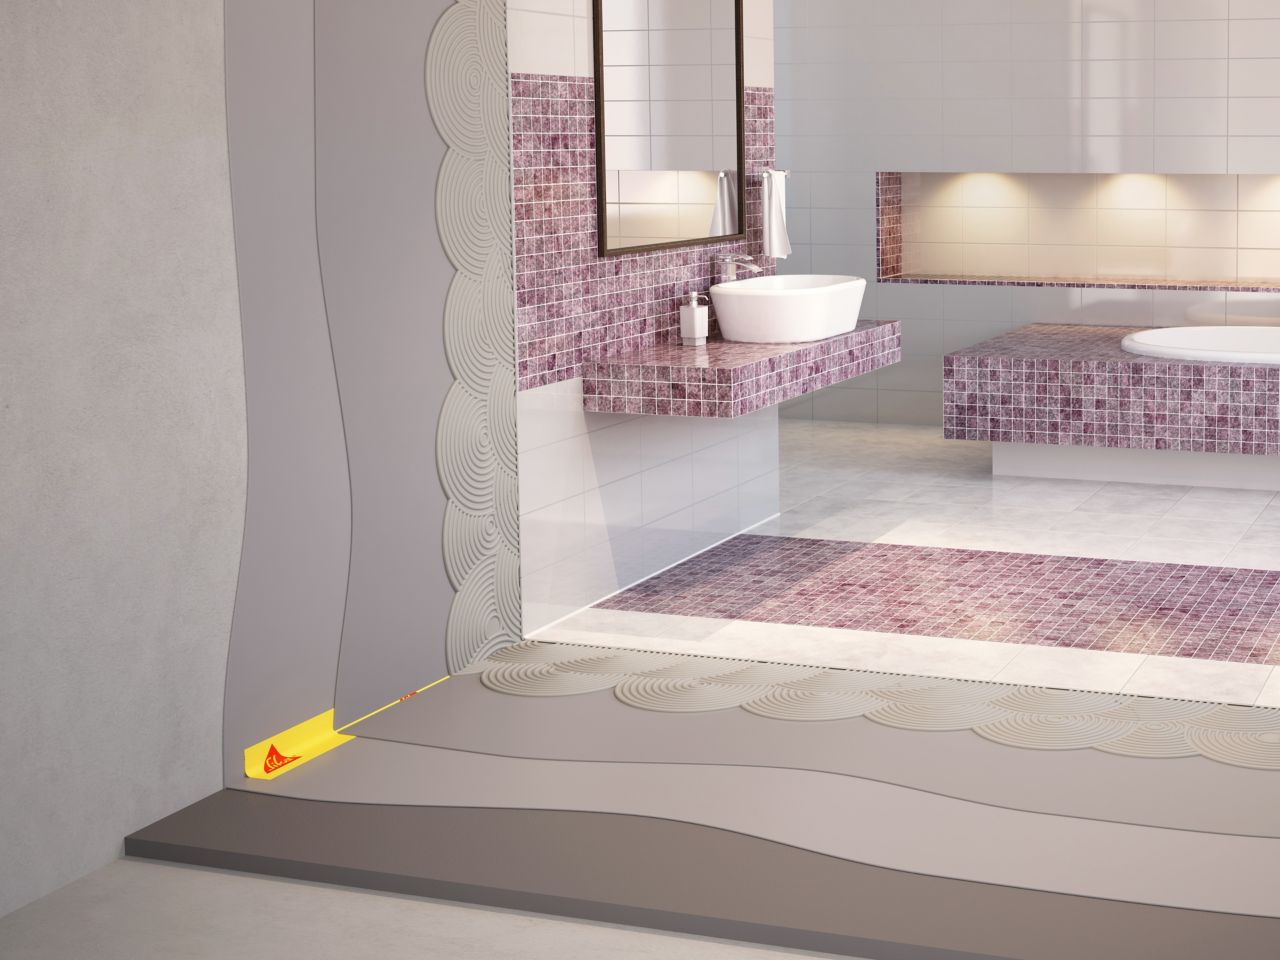 Illustration of tile setting adhesives and waterproofing tape for wet area bathroom with purple and white mosaic tiles, sink and bathtub